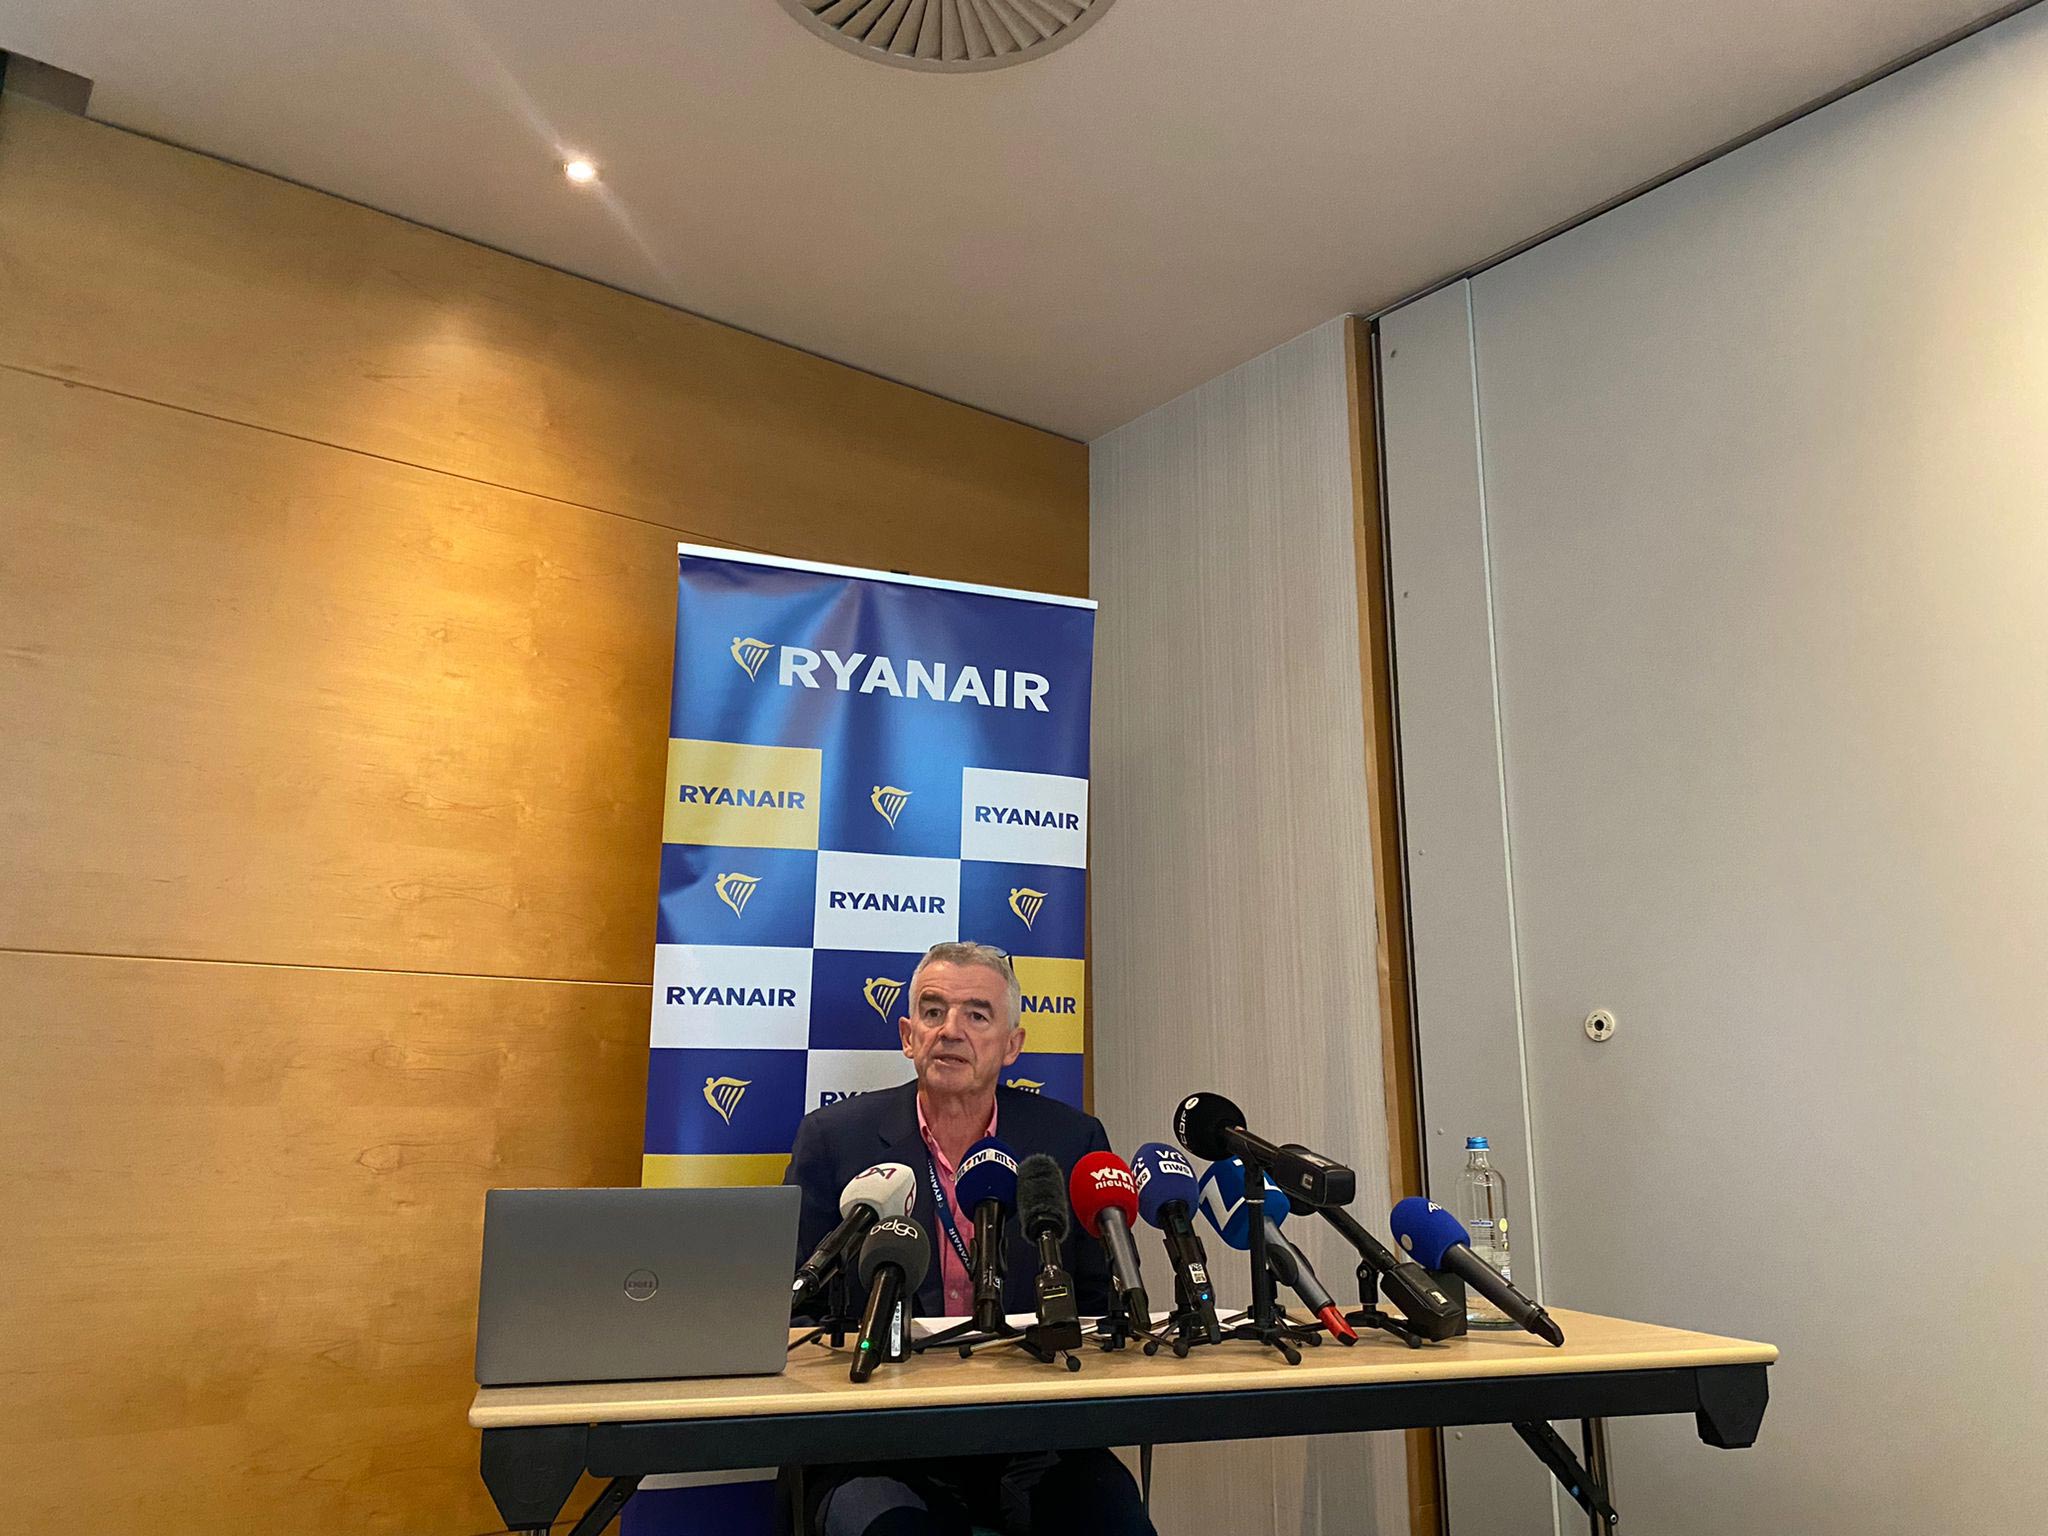 RYANAIR CLOSES BRUSSELS ZAVENTEM BASE FOR W22 AS A RESULT OF INCREASED CHARGES & TAXES